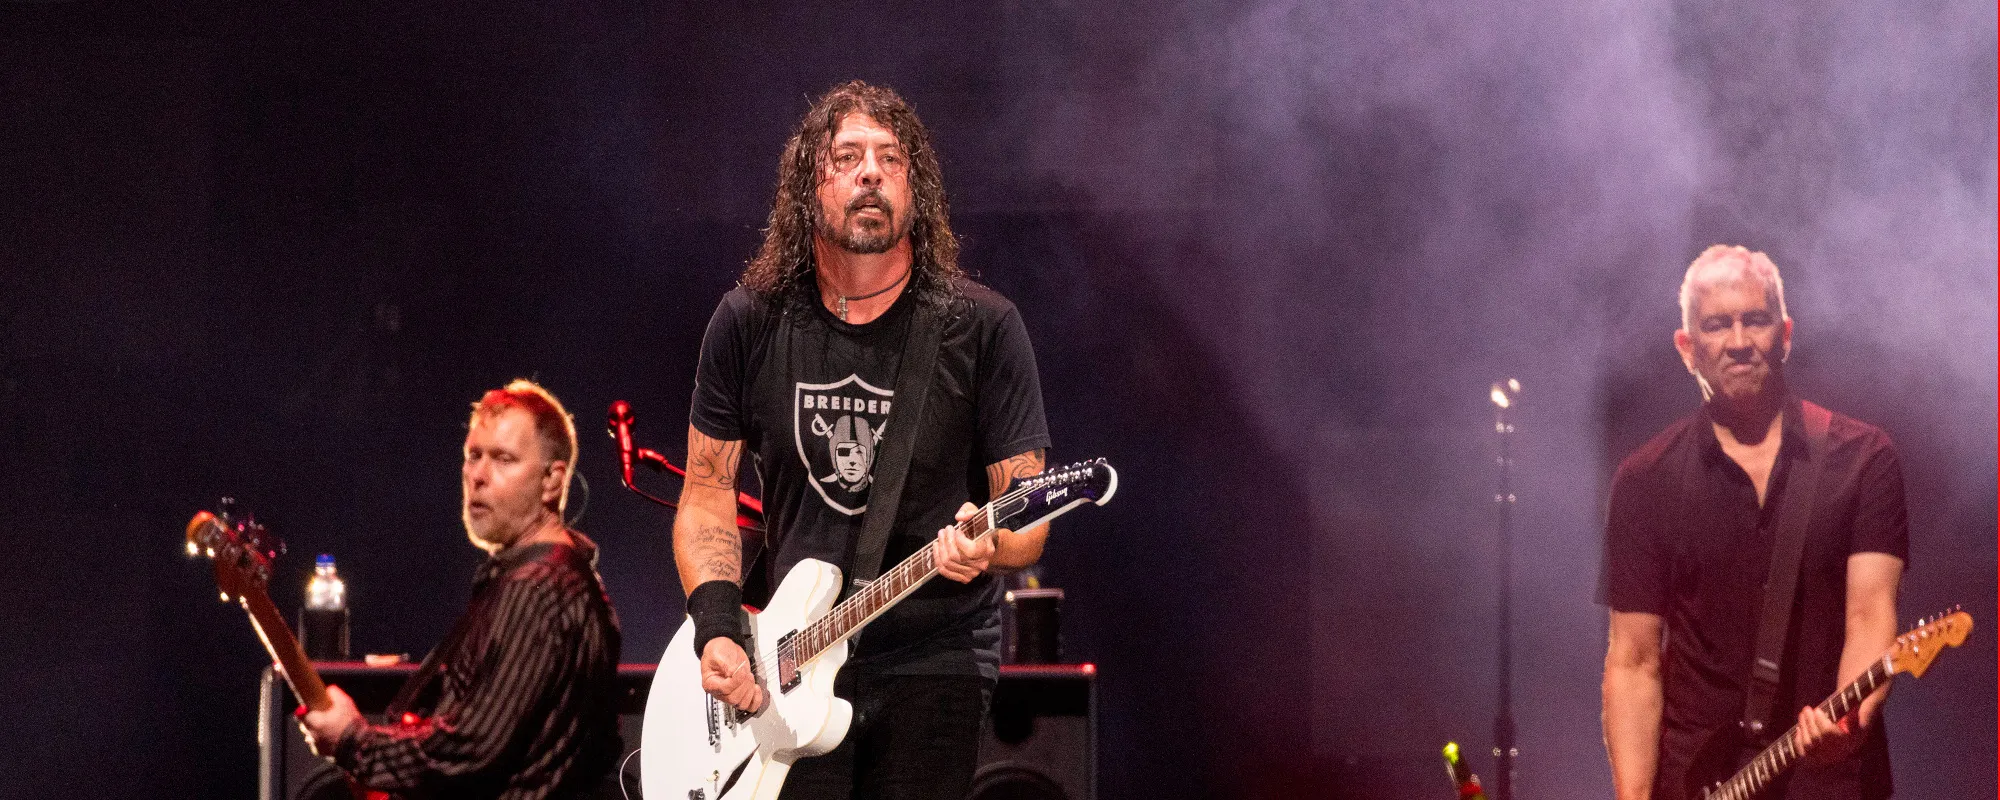 Watch the Foo Fighters Cover Led Zeppelin’s Iconic “Stairway to Heaven” During Their Ohana Festival Set